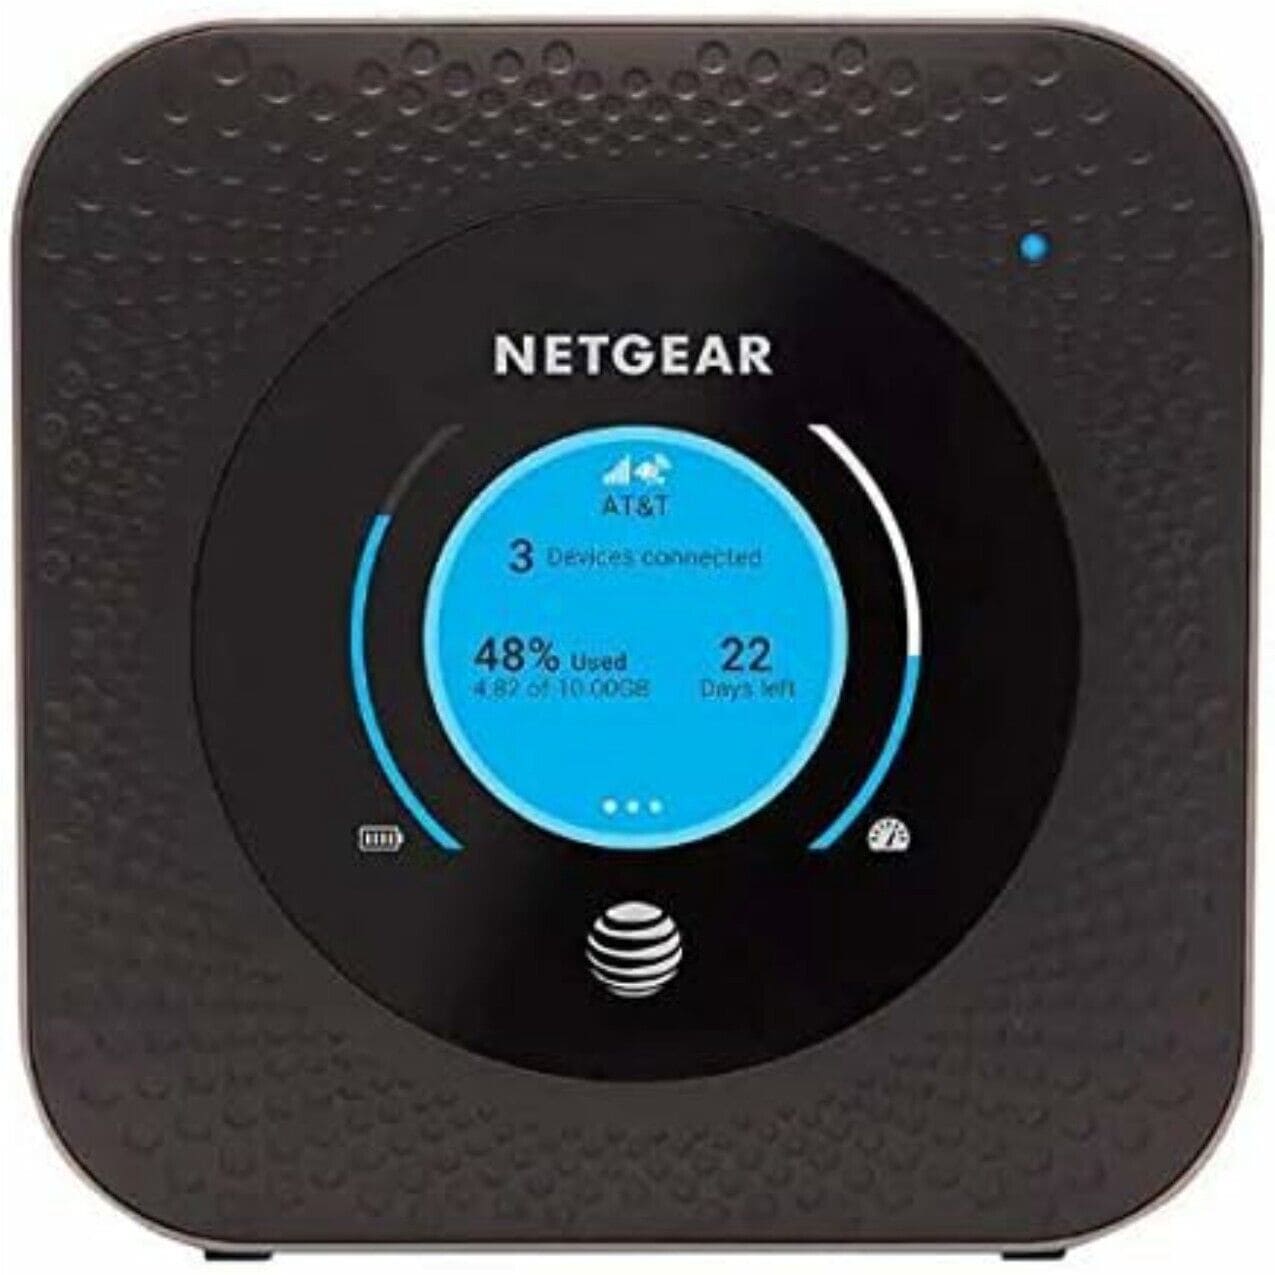 NETGEAR Wi-Fi Nighthawk M1 MR1100 Mobile Hotspot Router AT&T Locked (Refurbished-Excellent Condition)